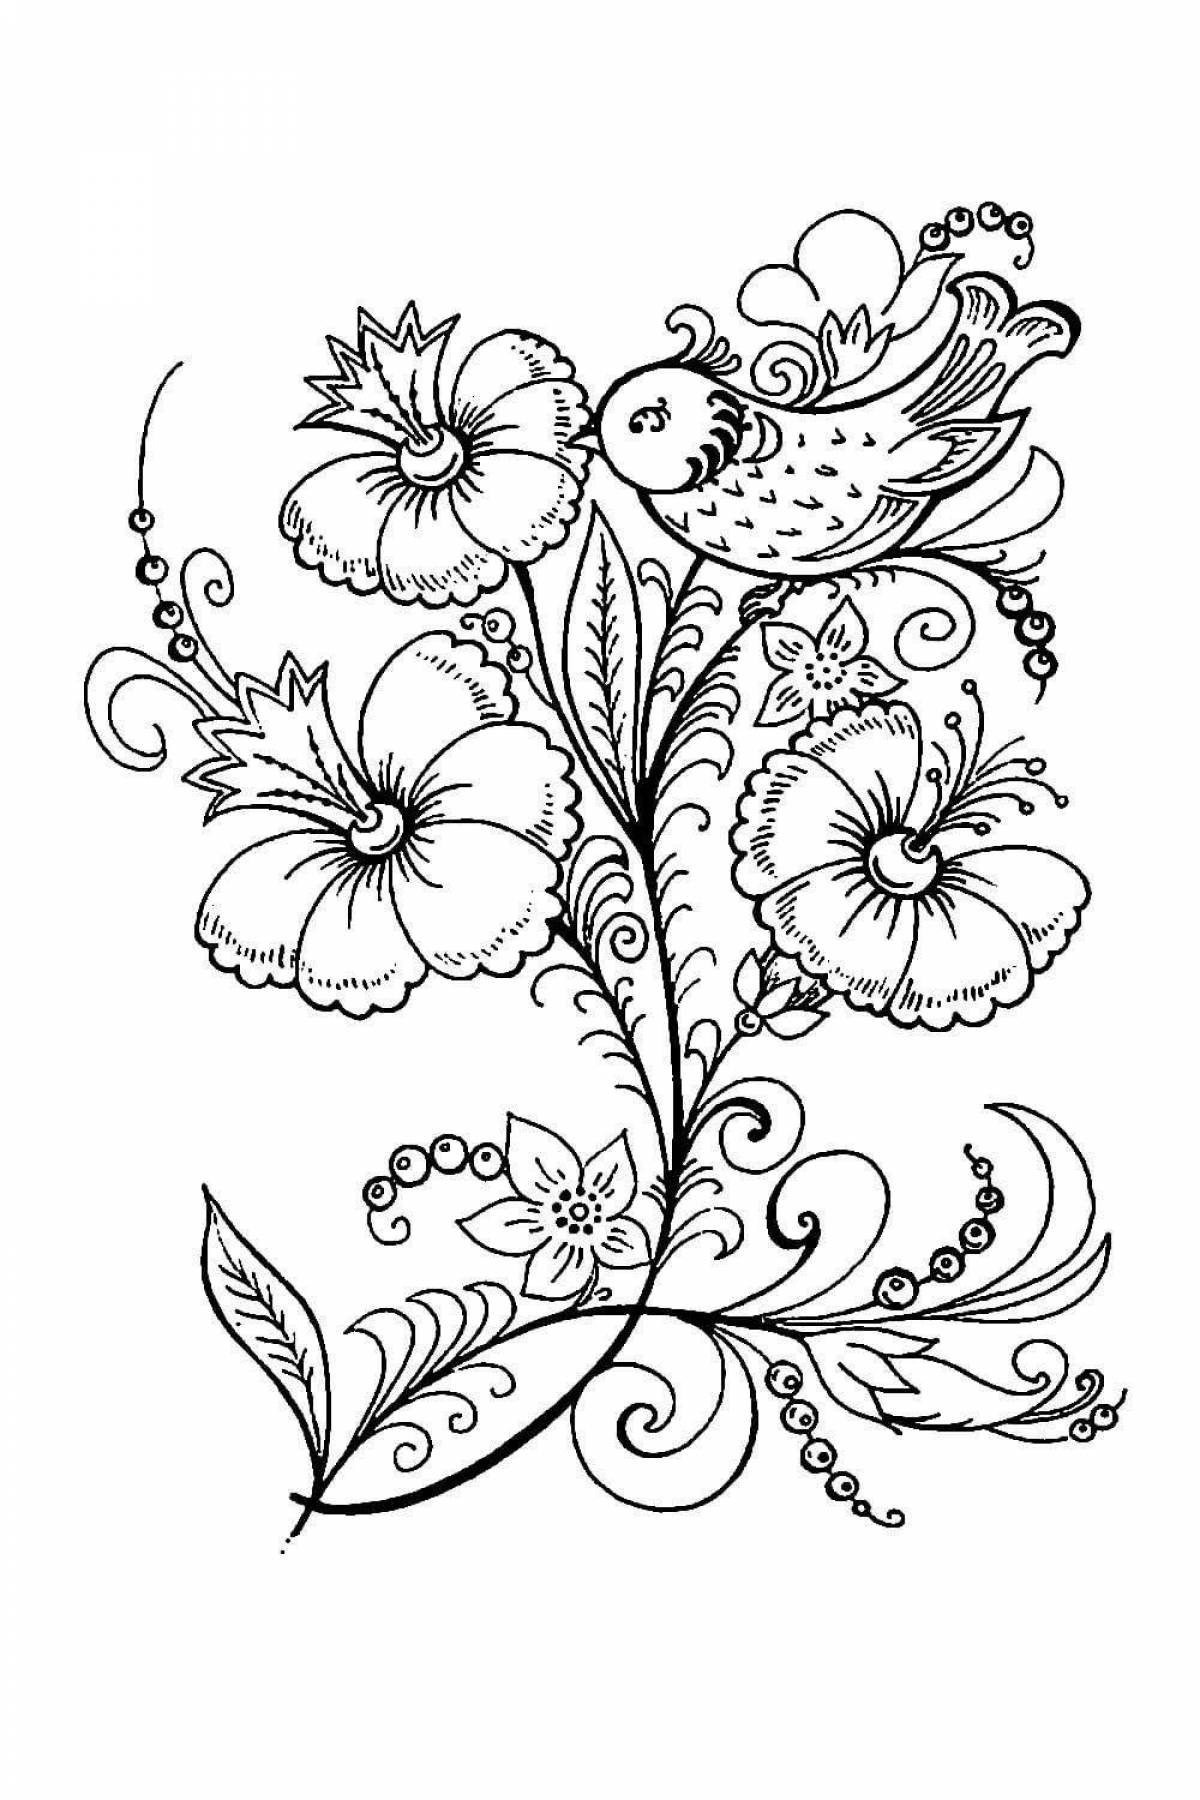 Play patterns and ornaments for coloring pages for children